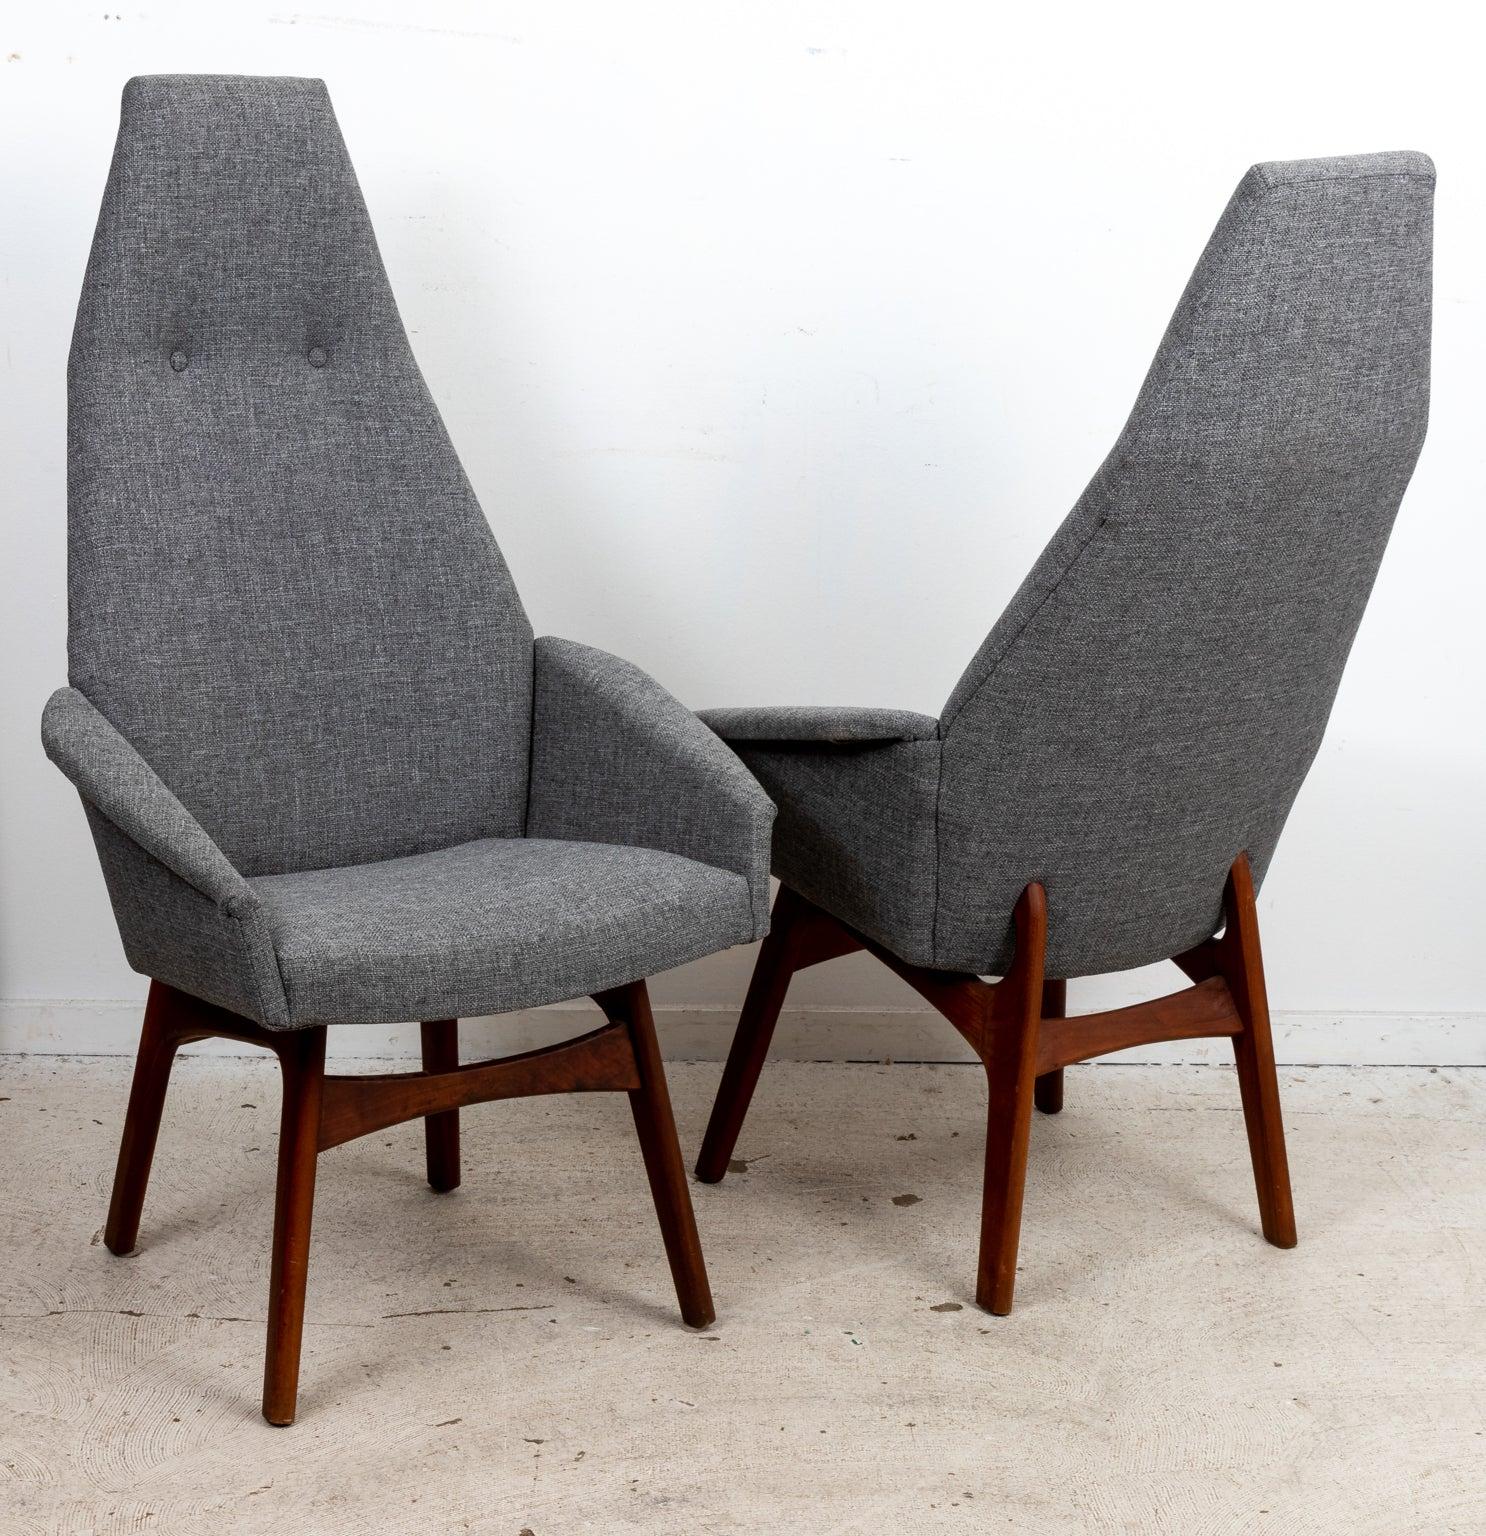 American Pair of Mid-Century Modern Style Walnut High Back Chairs by Adrian Pearsall For Sale